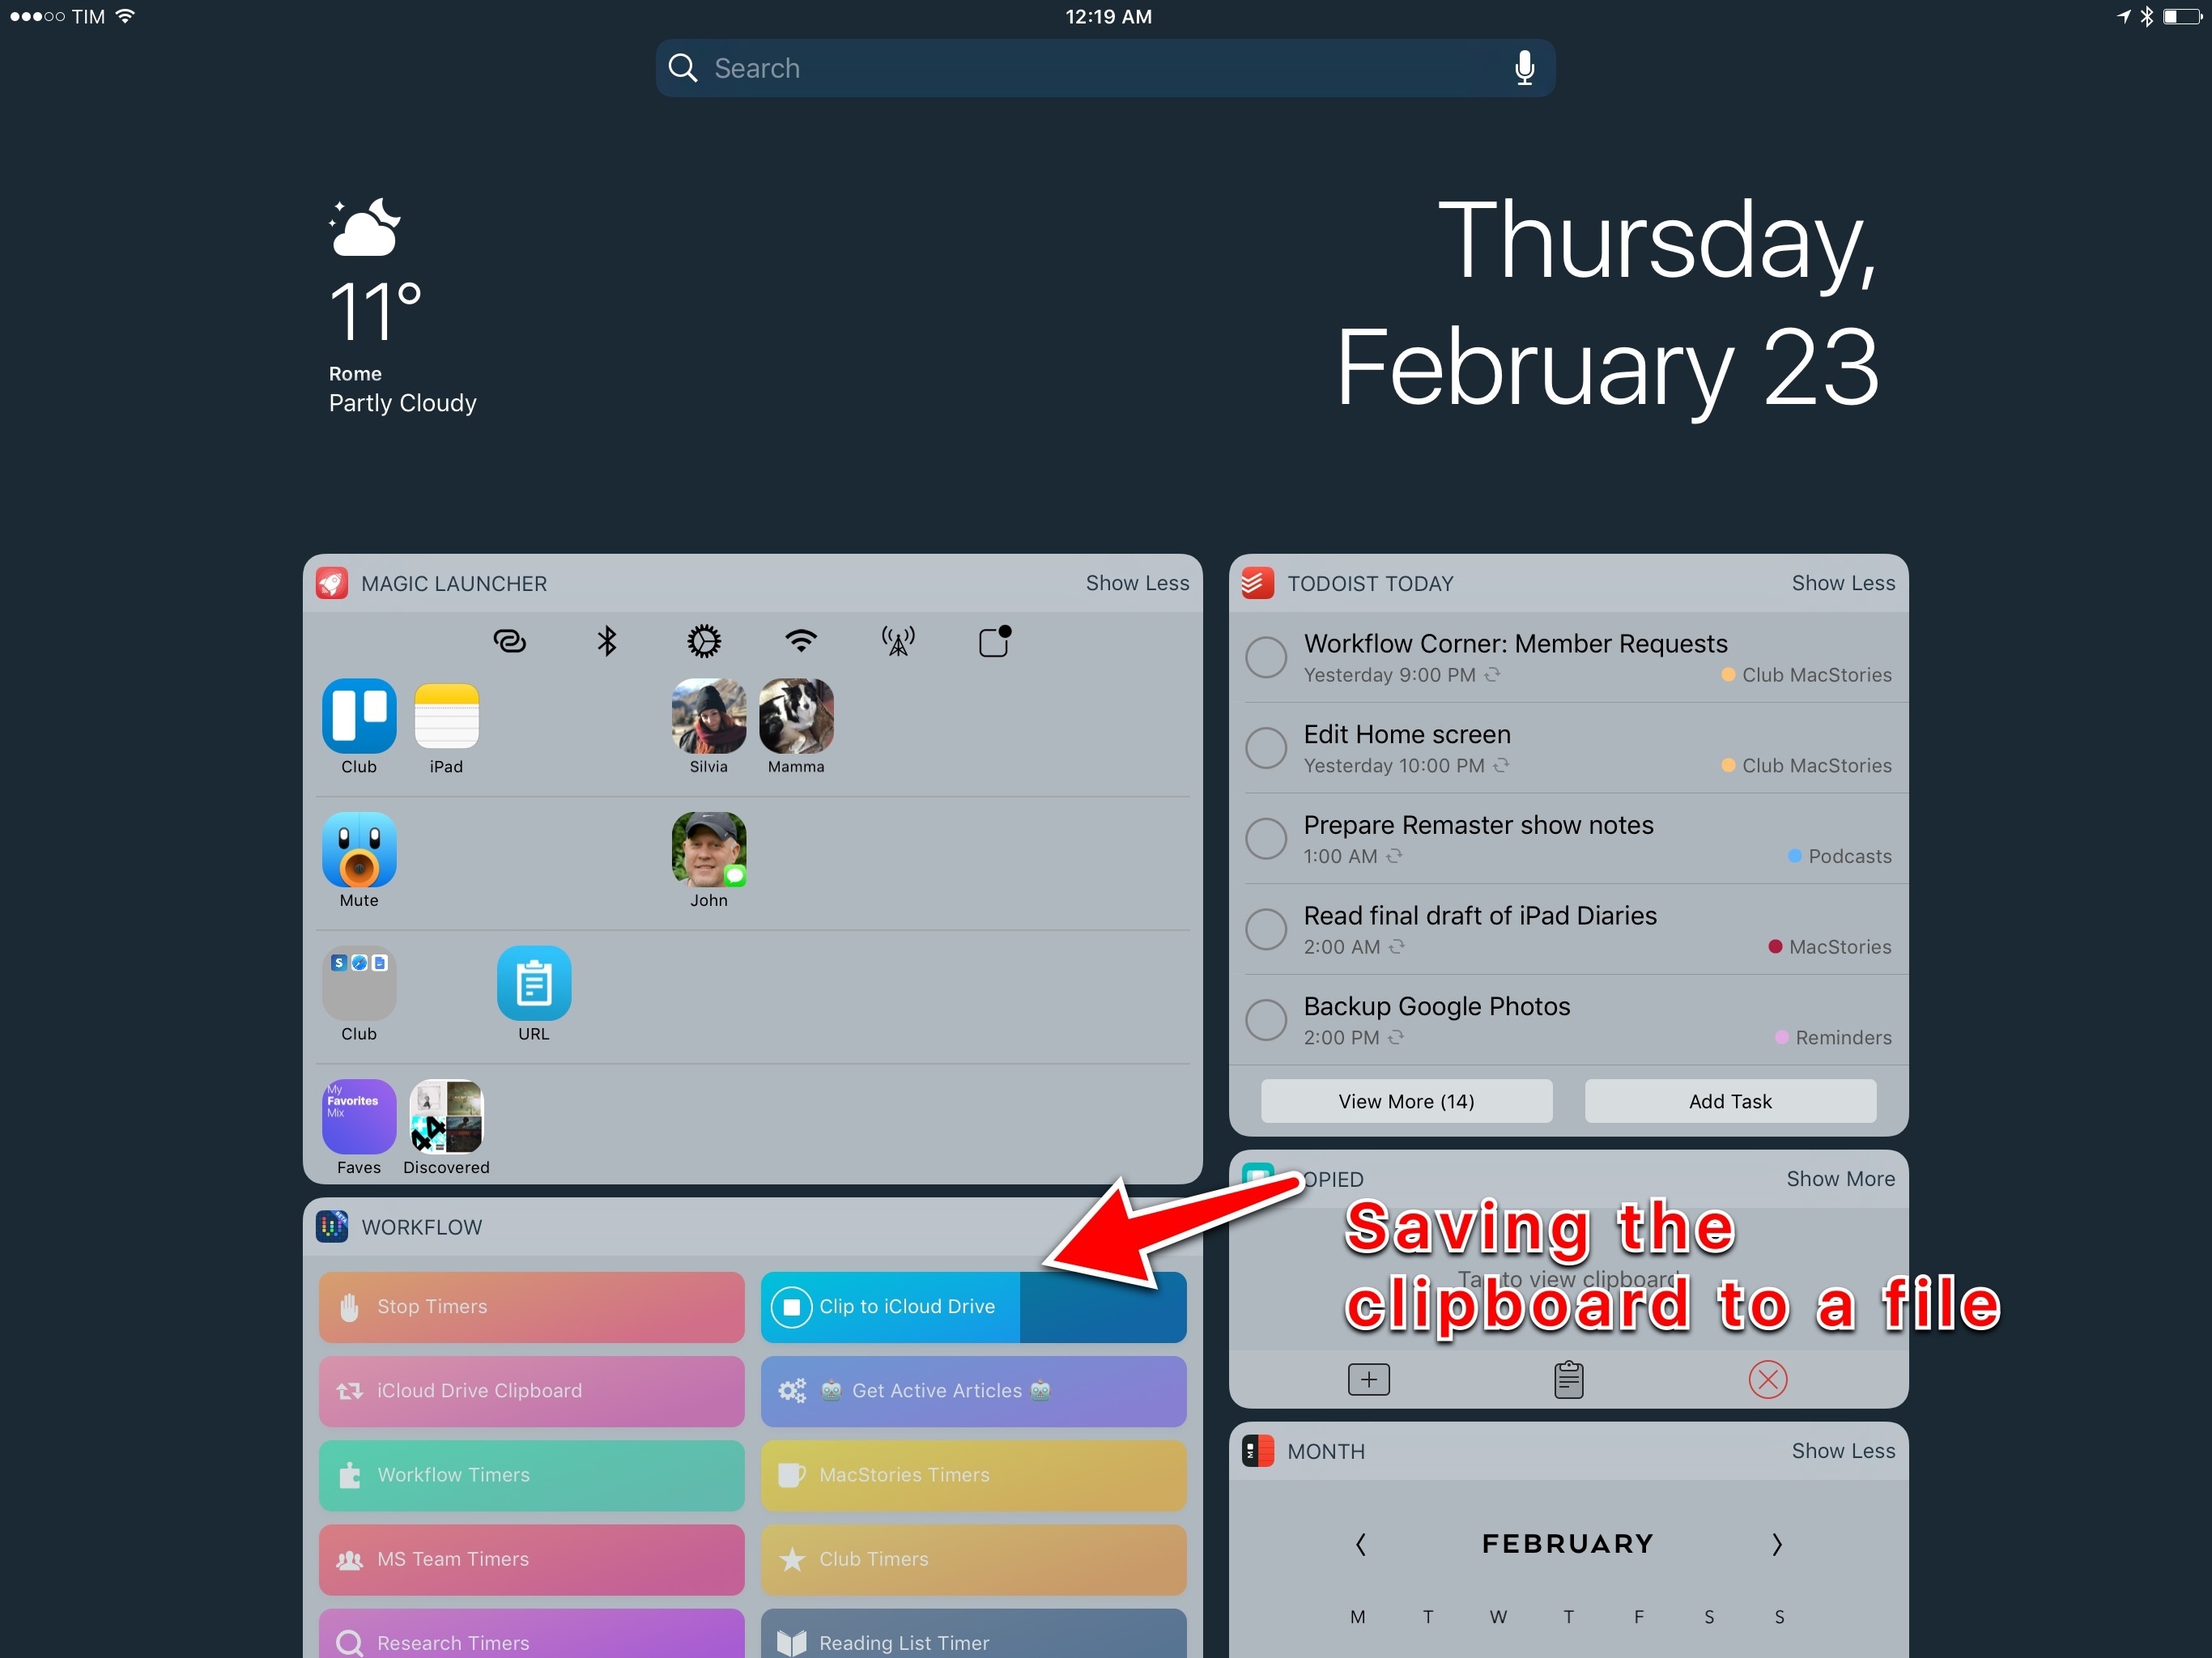 Saving the clipboard from a Workflow widget.